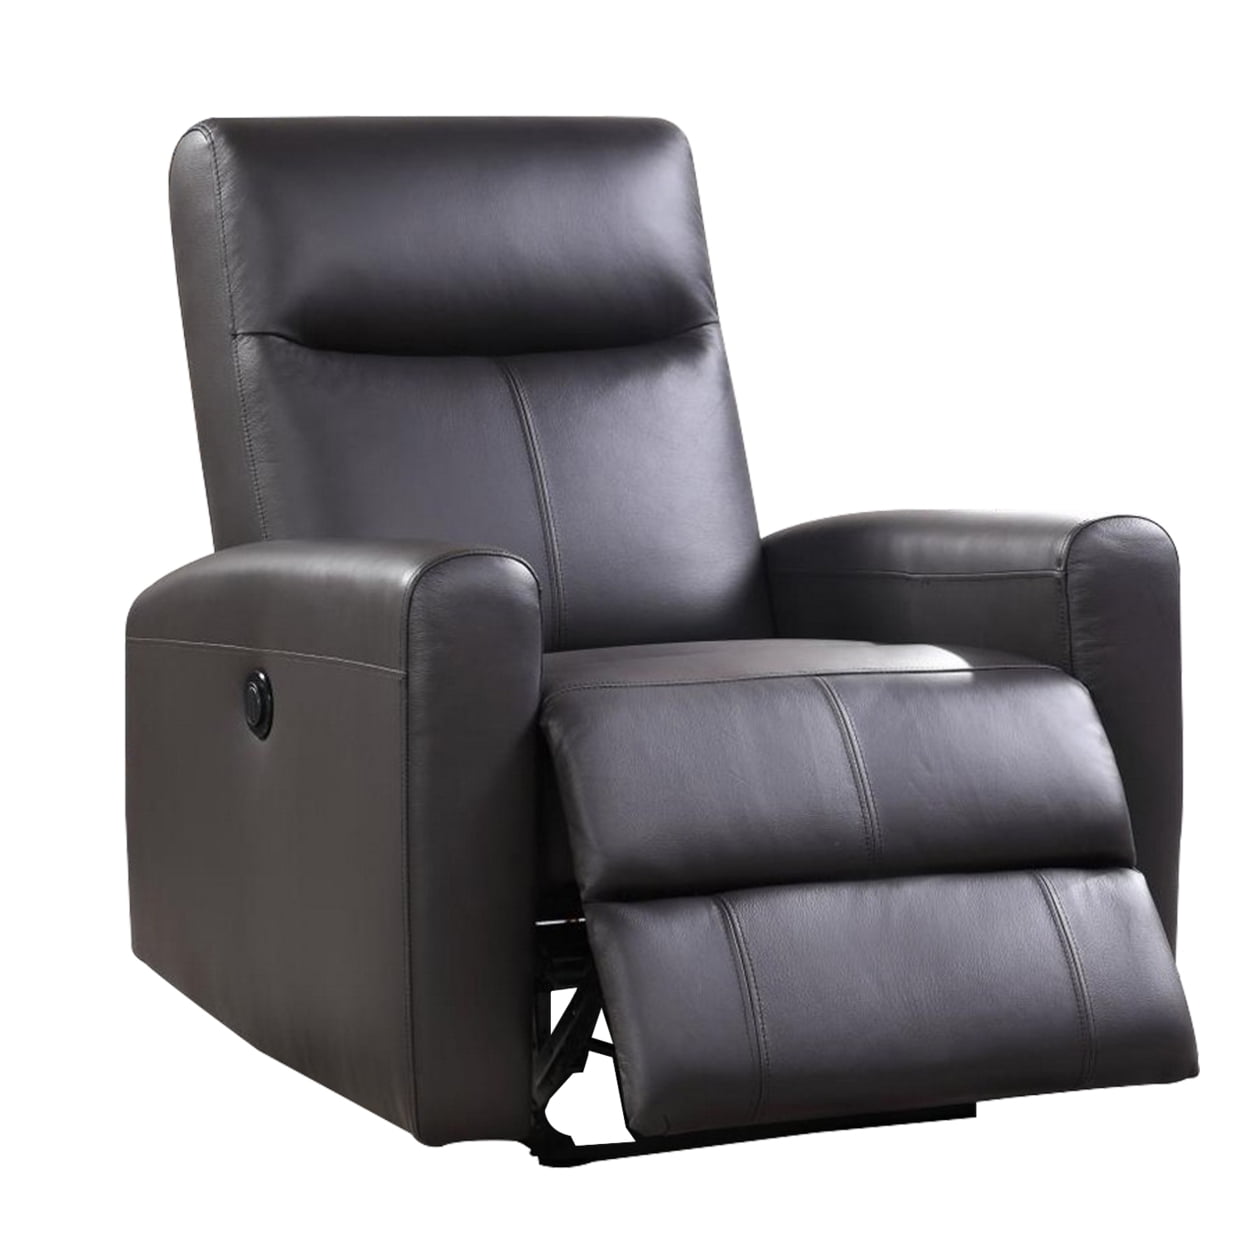 Picture of Benzara BM230146 Leatherette Power Recliner with Tufted Back, Brown